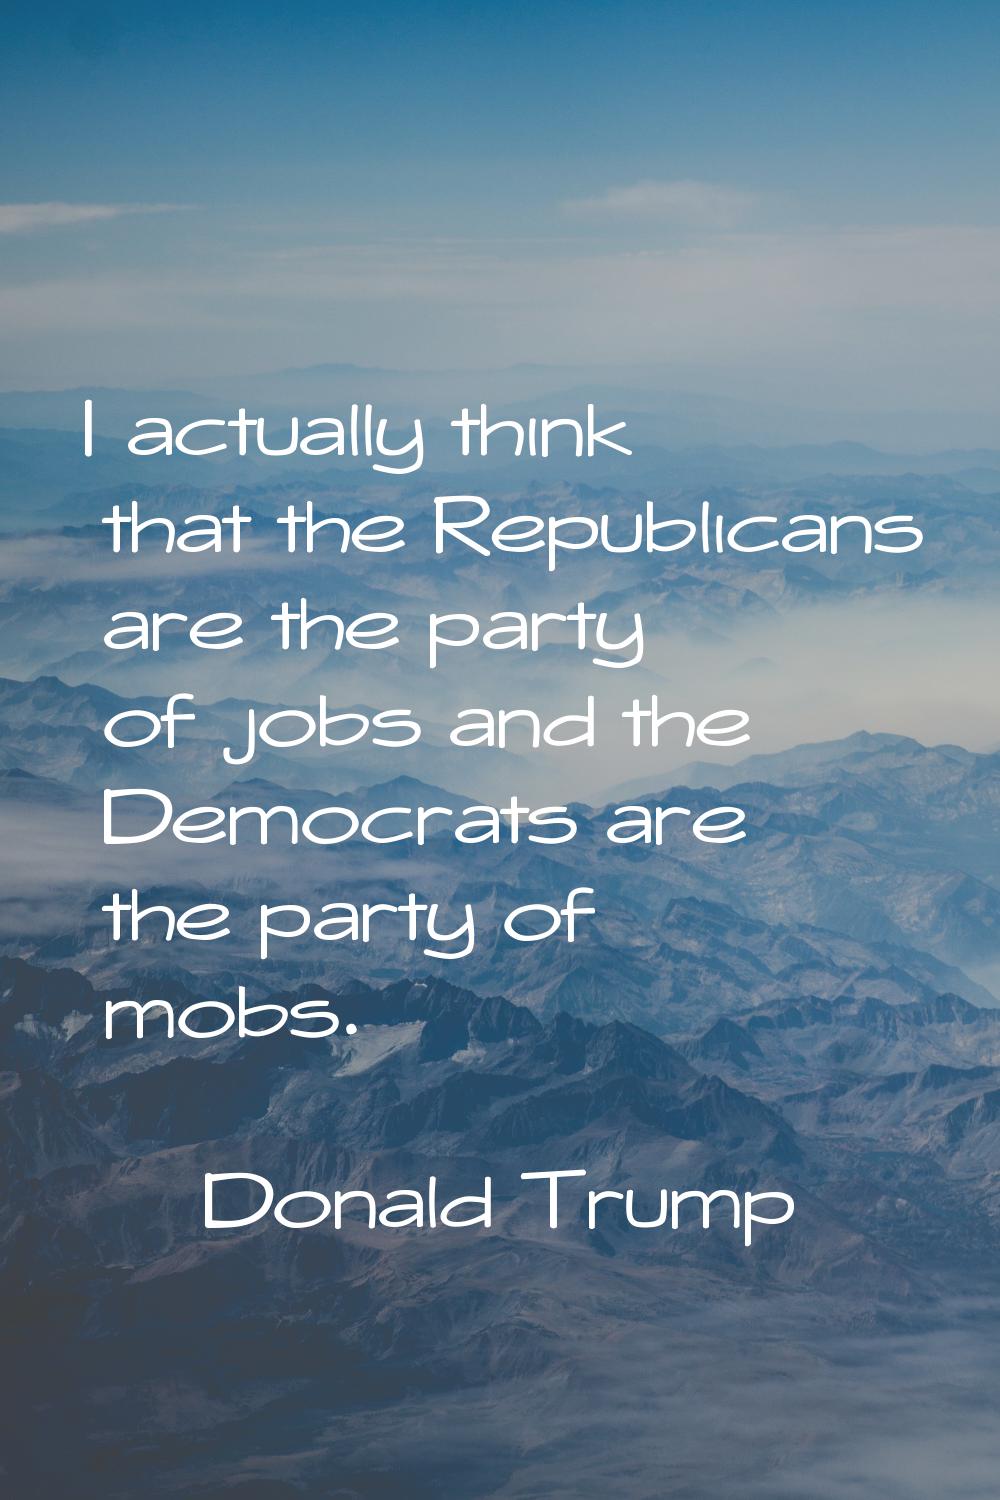 I actually think that the Republicans are the party of jobs and the Democrats are the party of mobs